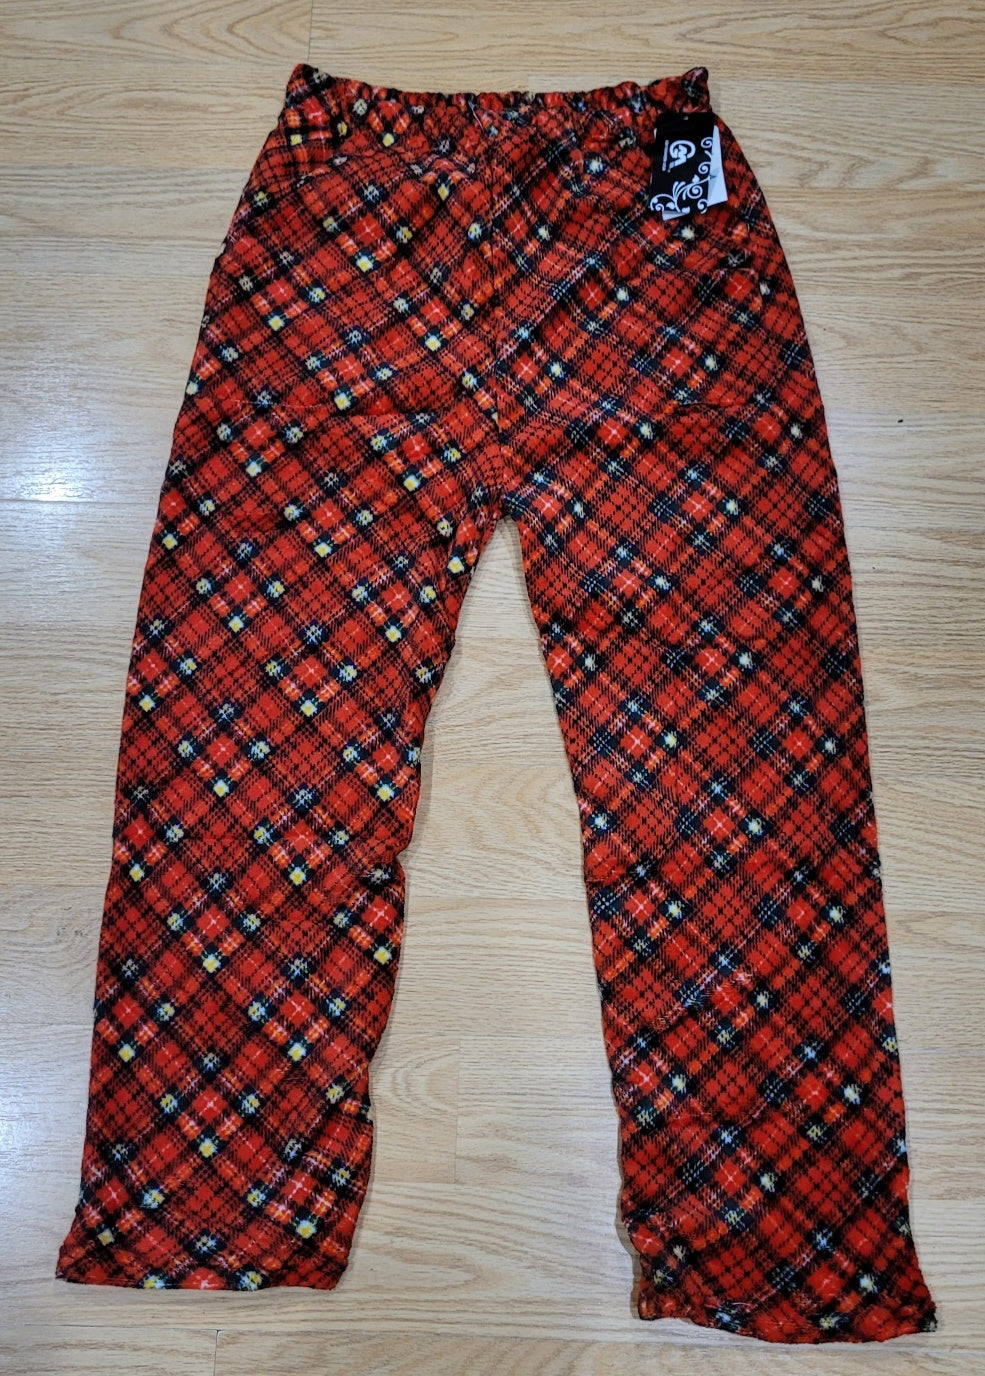 Sweet Dream Collection - Plush Lounge Pajama Pants w/Front Pockets